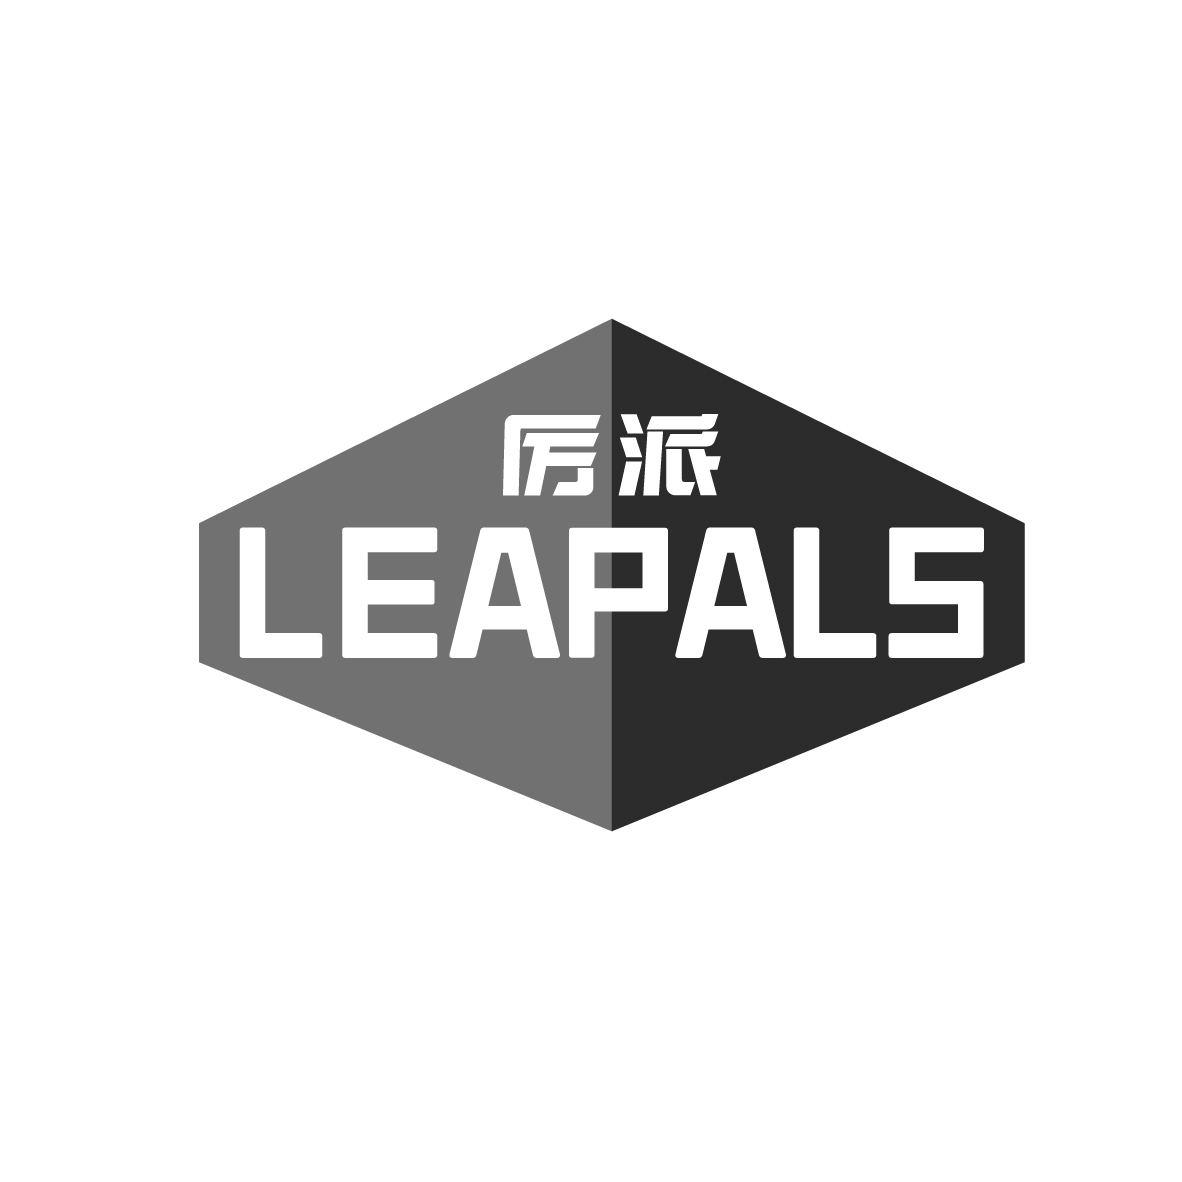  LEAPALS